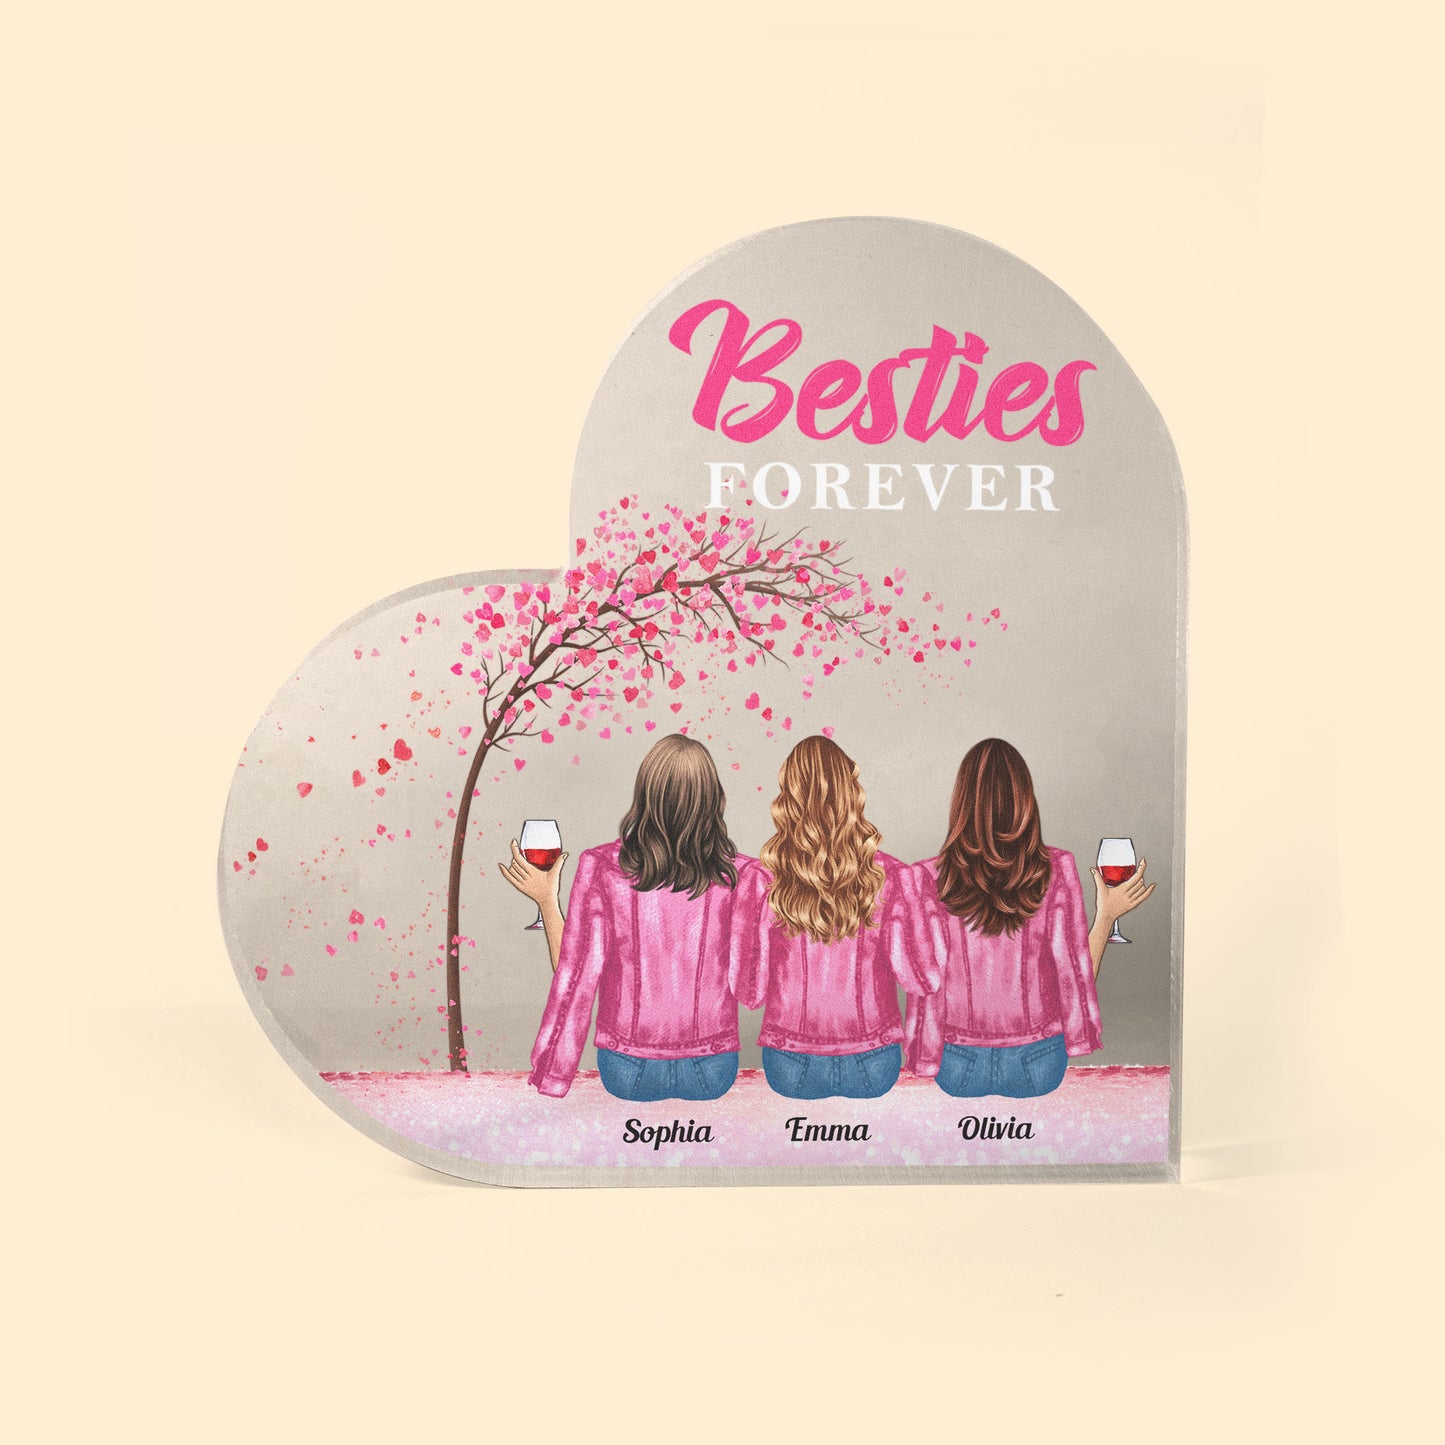 Forever Besties - Personalized Heart-Shaped Acrylic Plaque - Birthday, Funny, Friendship Gift For Besties, BFF, Sisters